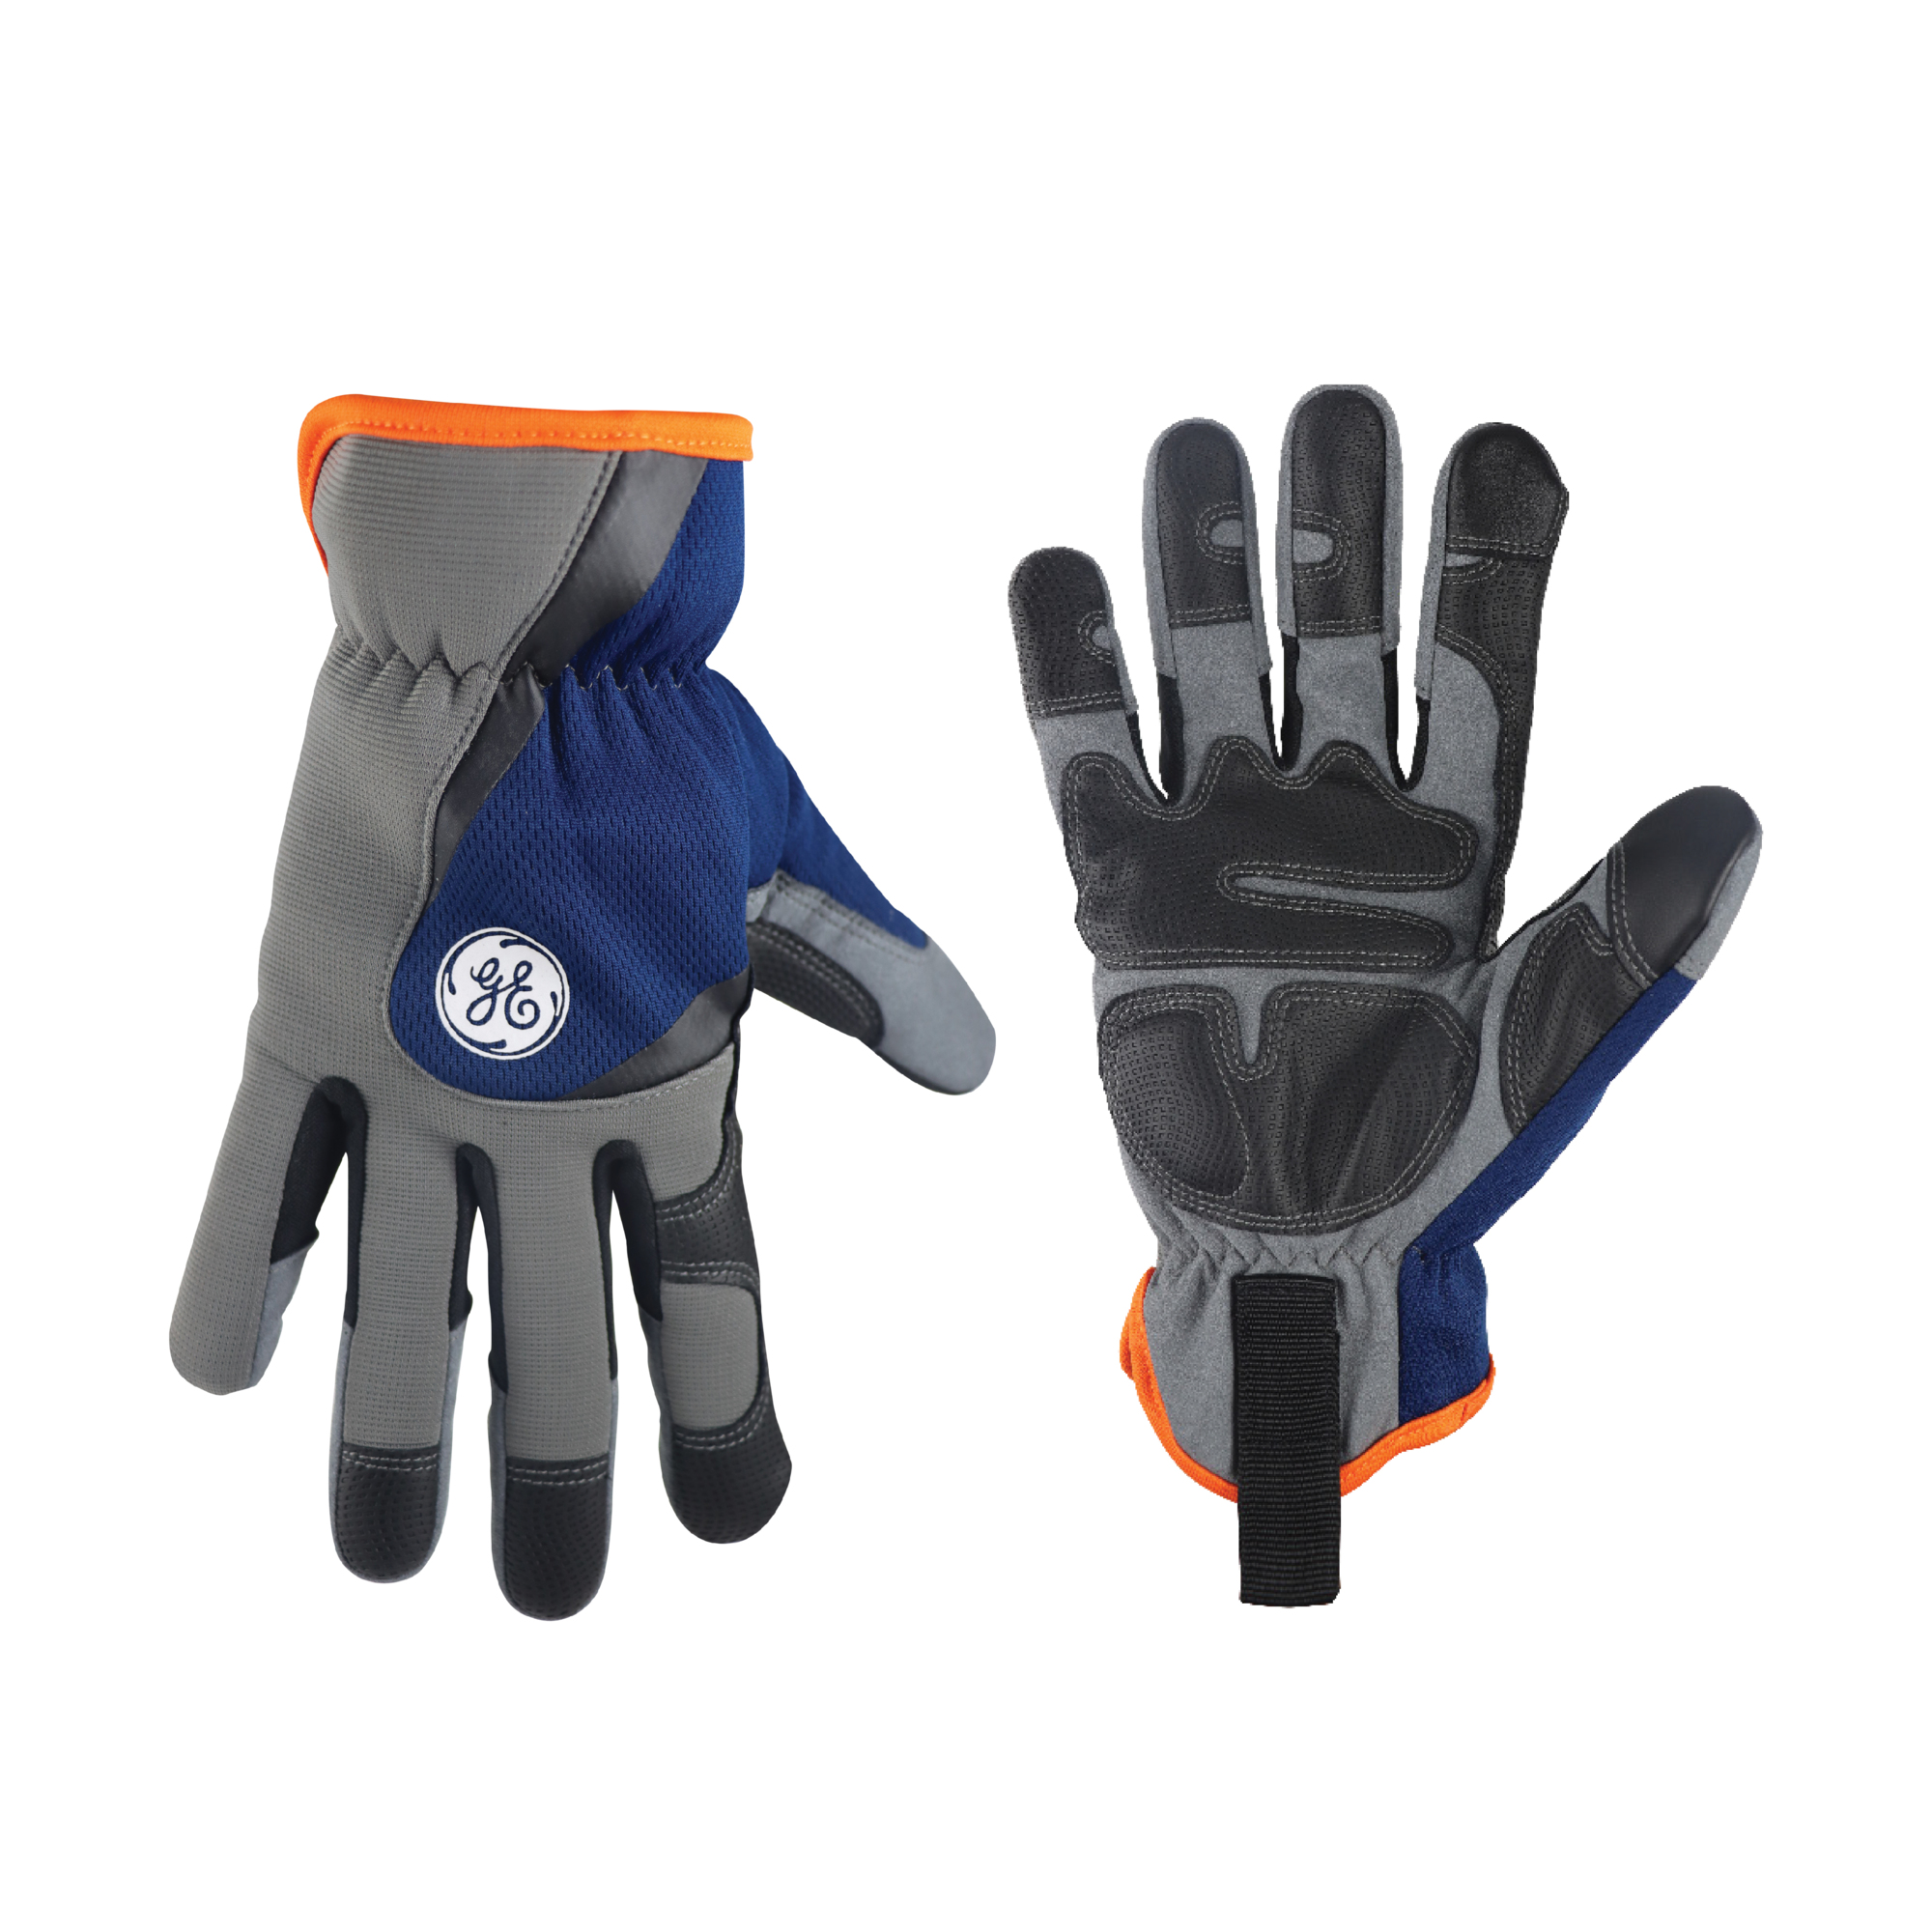 General Electric, Mechanic's Glove Multicolor L 1 pair, Size L, Included (qty.) 1, Model GG410LC